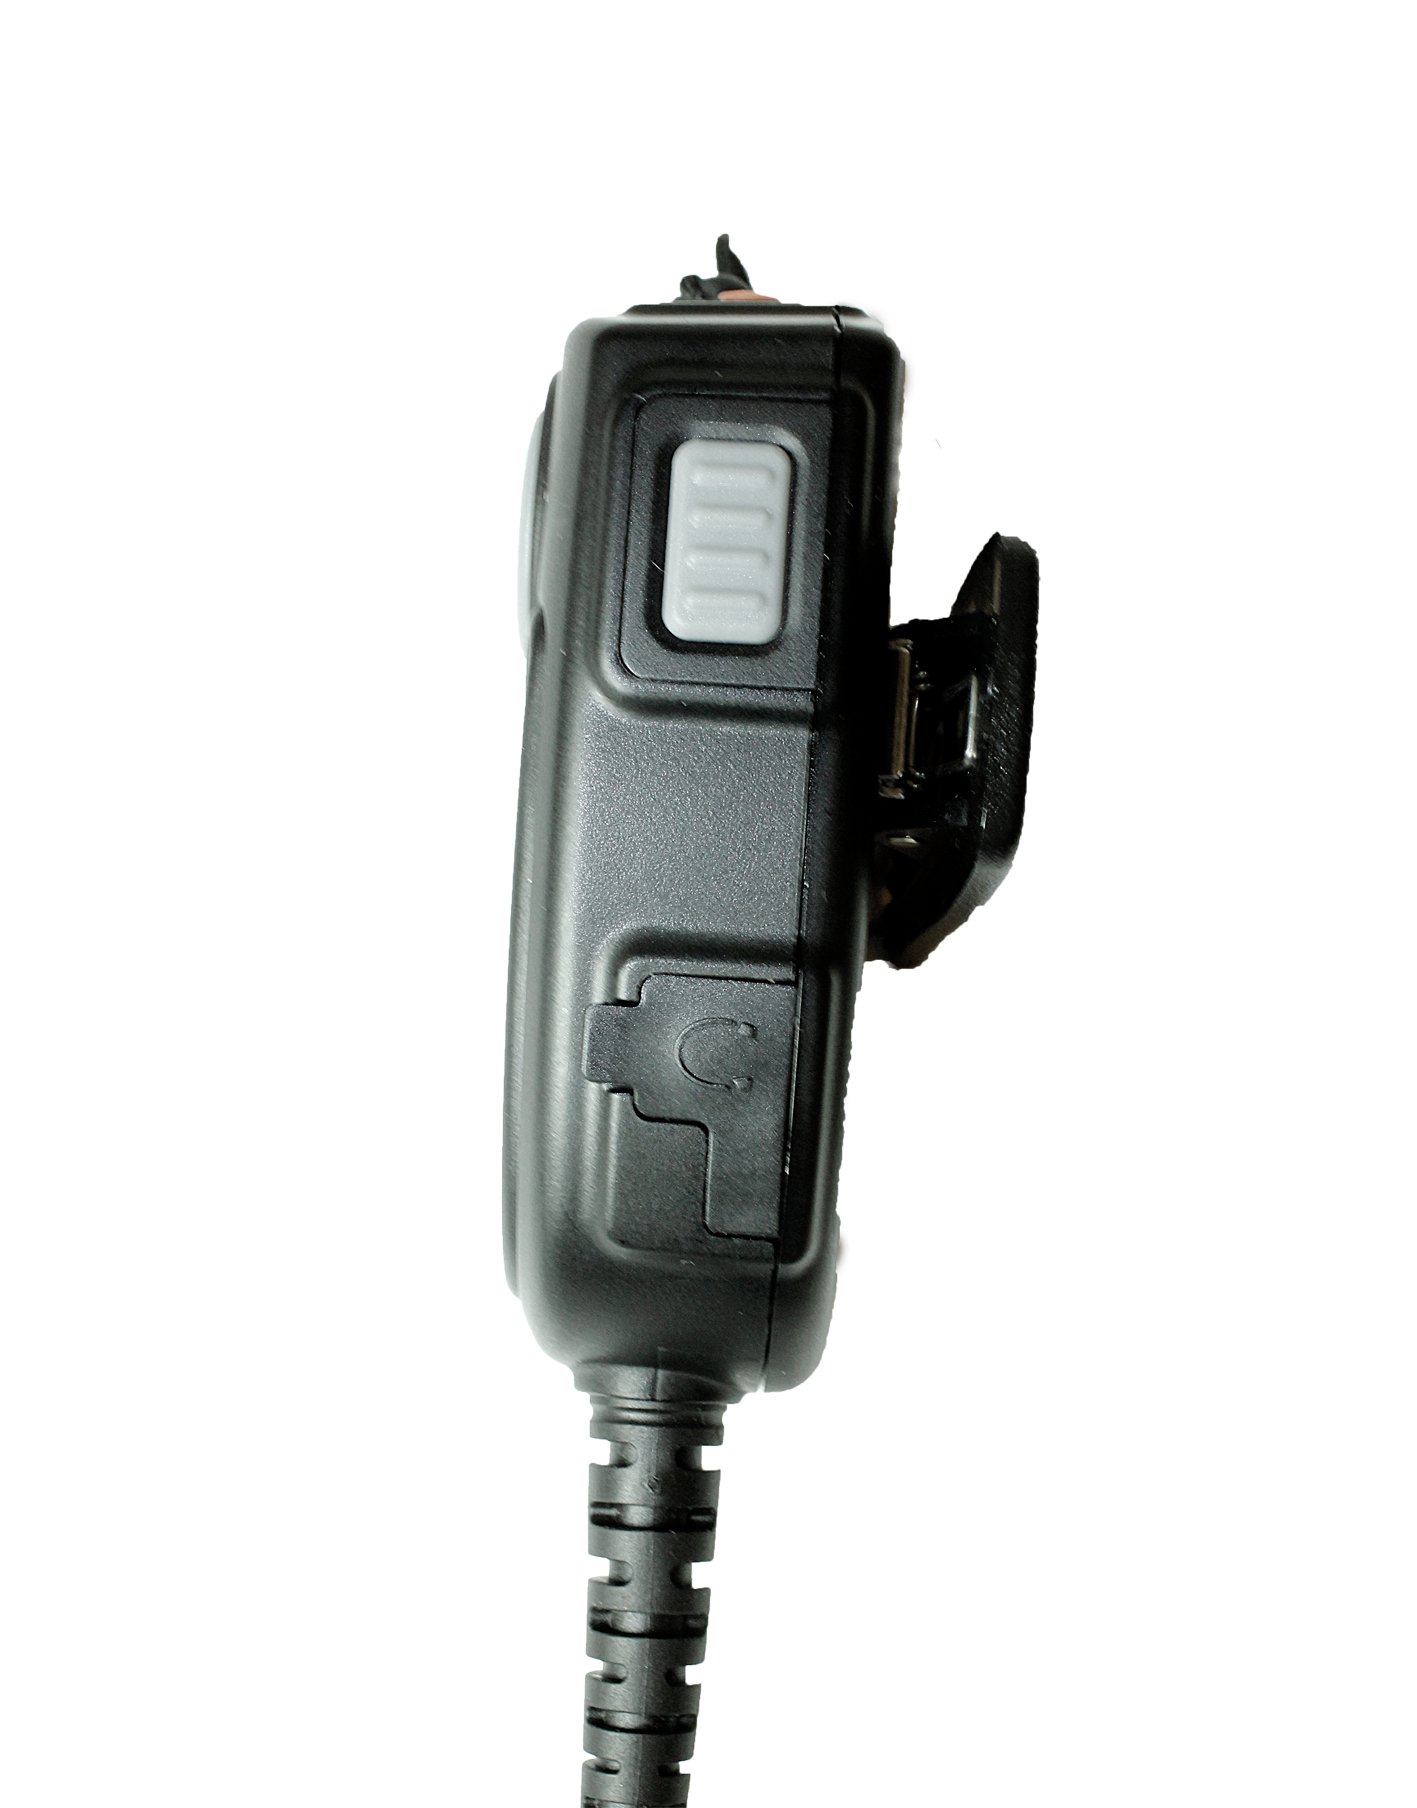 TITAN remote speaker microphone MM20 with Nexus socket 01 suitable for ICOM M85E